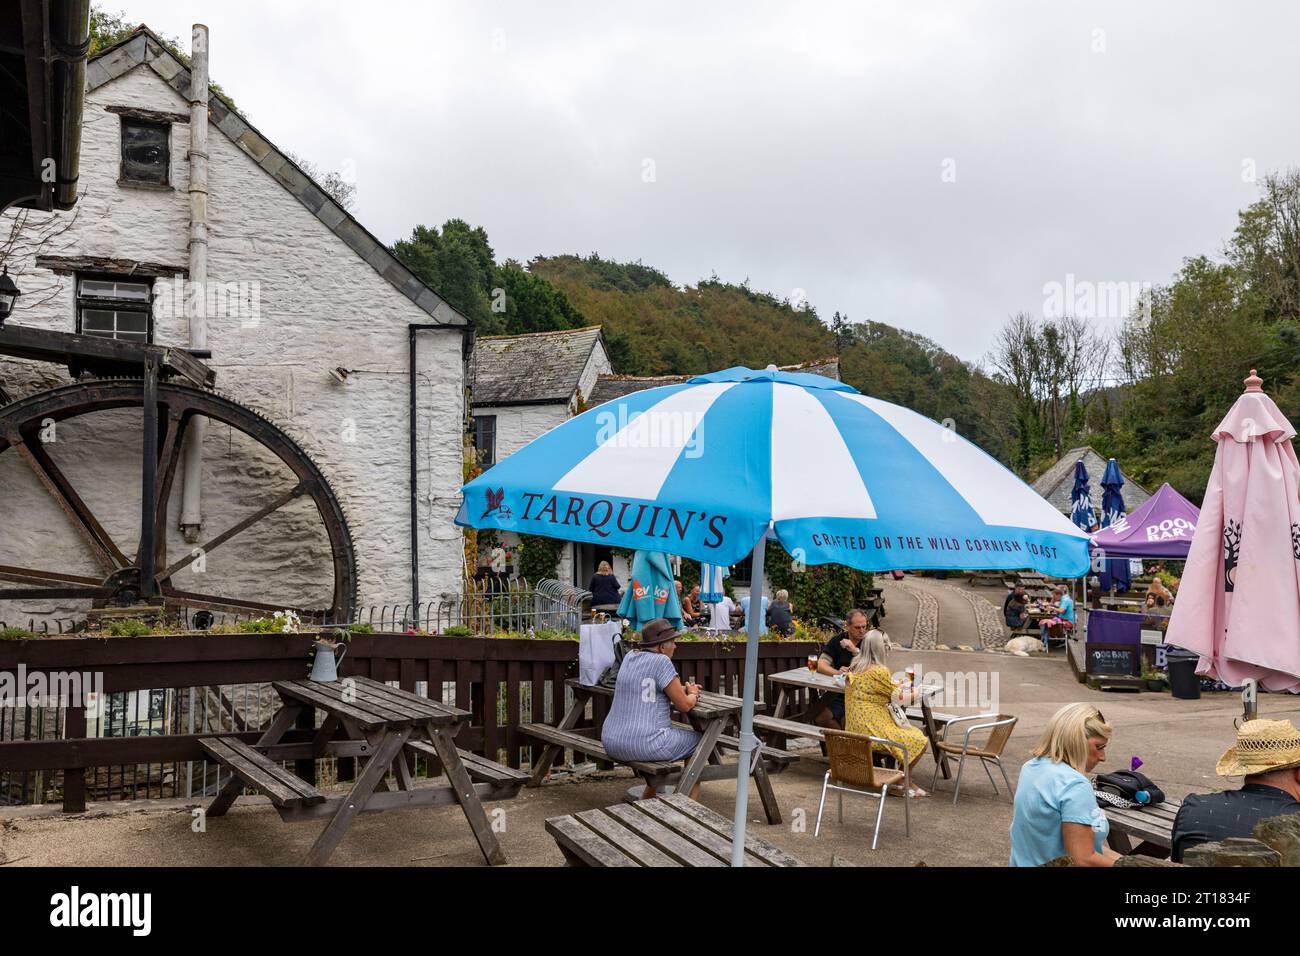 The Crumplehorn Inn & Mill in Polperro village,Cornwall,England,UK taken September 2023, people sitting outside drinking and eating Stock Photo